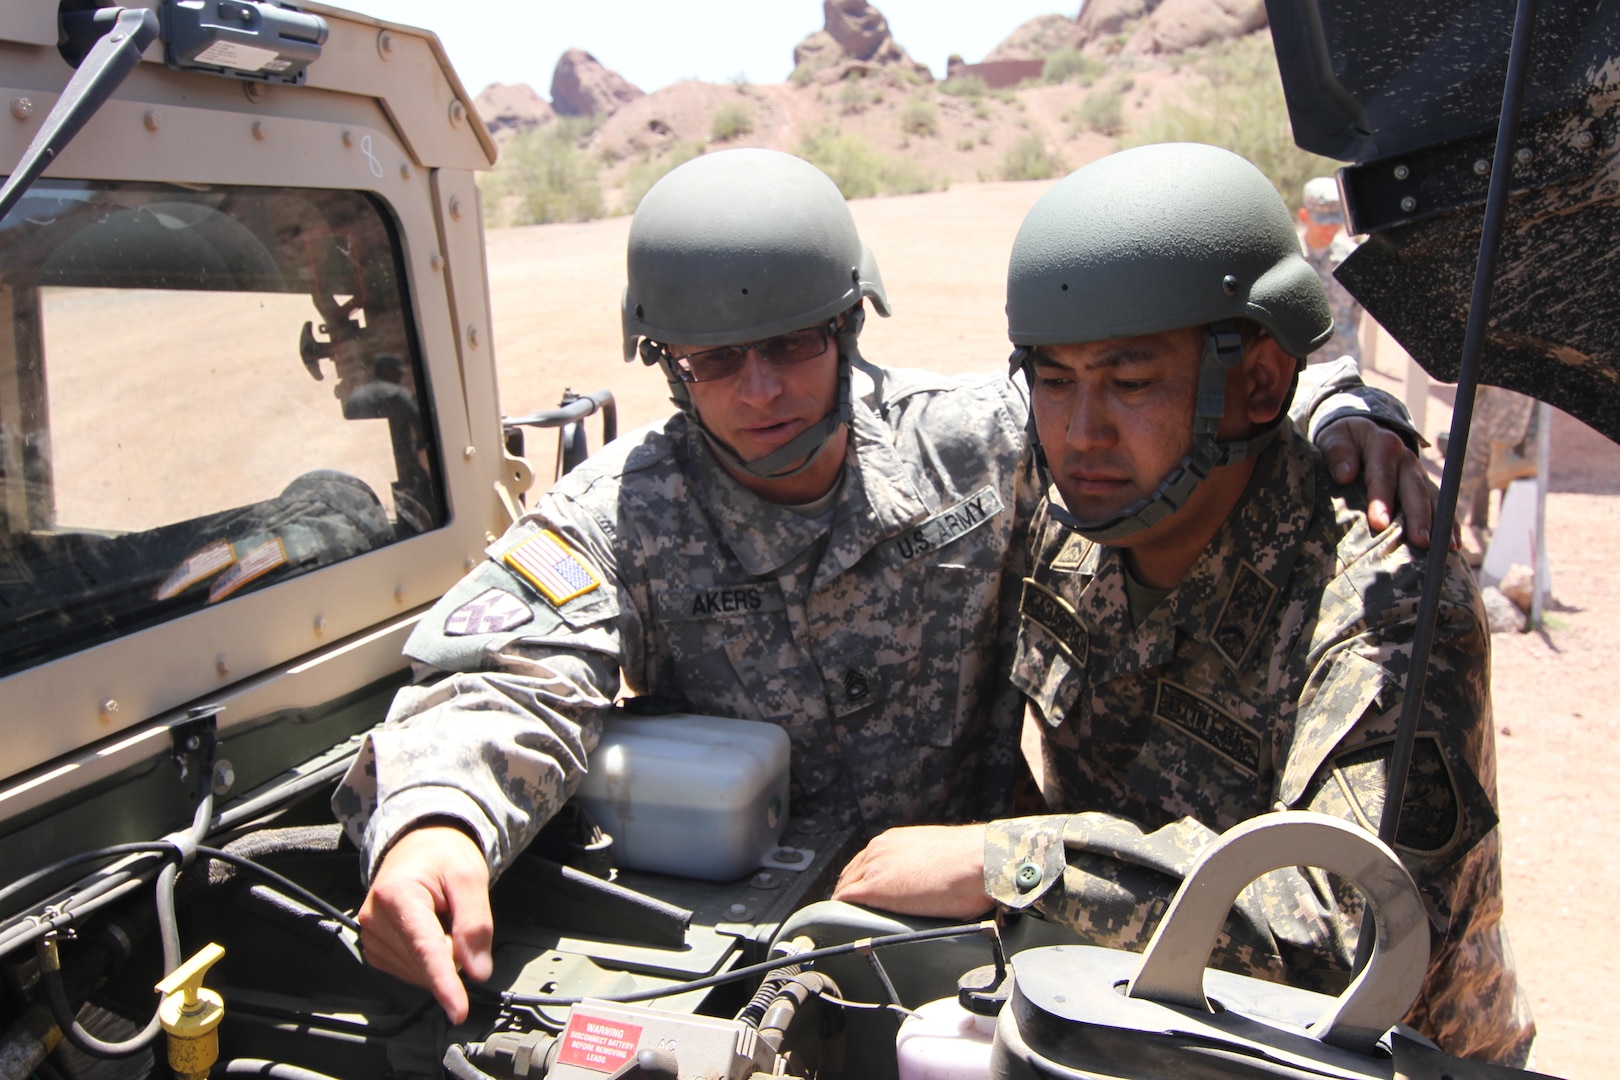 Army Sgt 1st Class James Akers, left, and Kazakhstan Army Staff Sgt. Dumon Moldrakhman, discuss high mobility multipurpose wheeled vehicle, or Humvee, maintenance information at Papago Park Military Reservation in Phoenix May 12 - 16. Since 1994 the Arizona National Guard has partnered with Kazakhstan as part of the National Guard's State Partnership Program. 